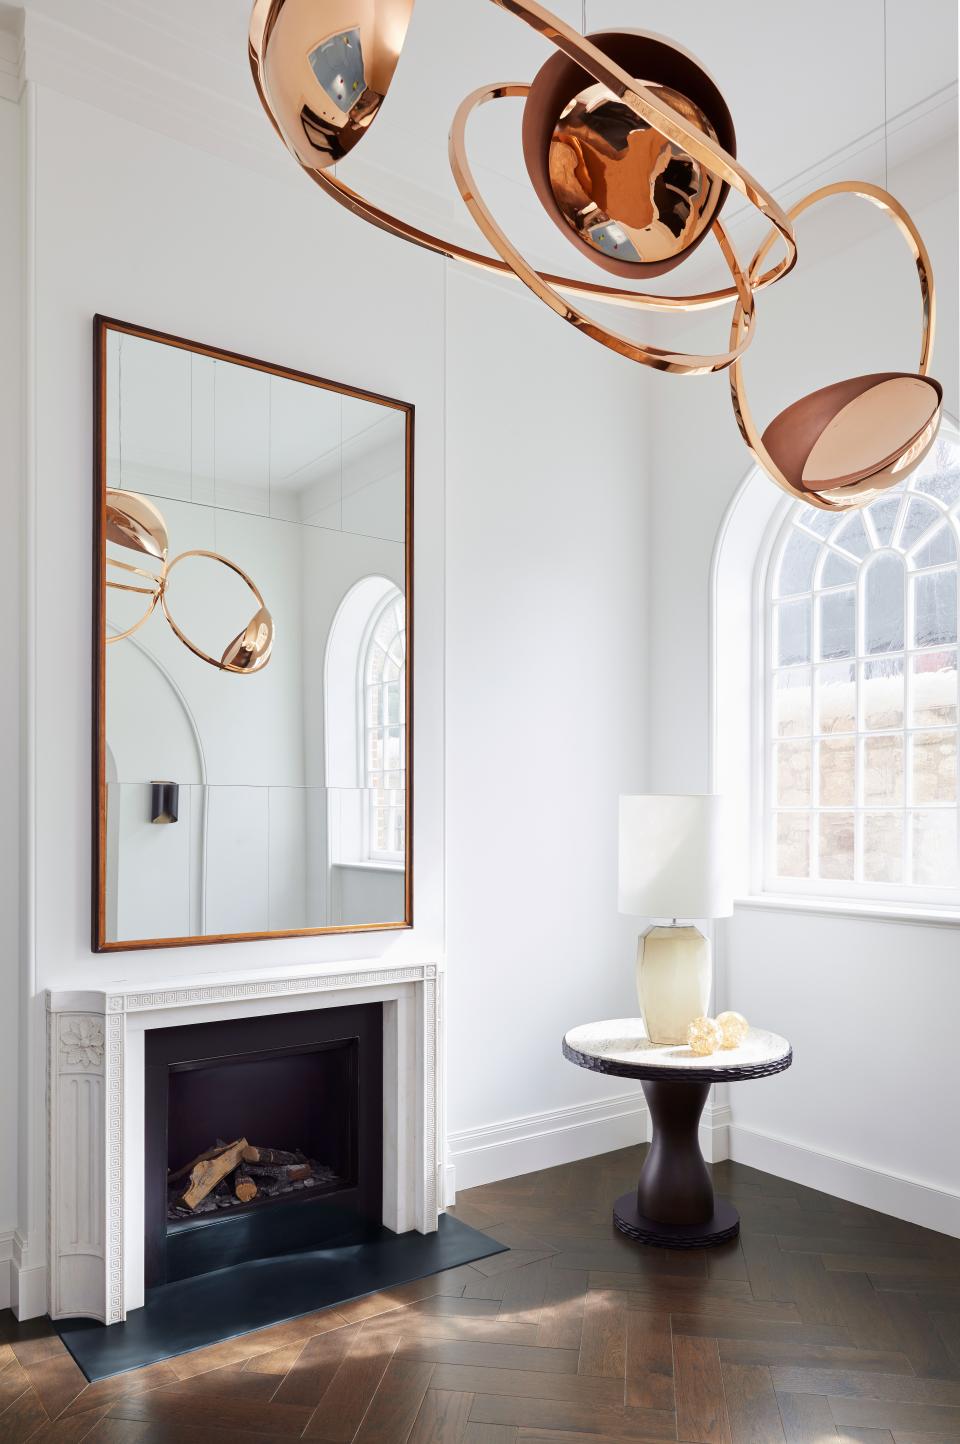 A sculptural pendant by Dublin-based designer Niamh Barry was purchased from Maison Gerard New York for this area of the house. The 1940s mirror is from London antique dealer Carlton Davidson while the round bronzed table is from Marc de Berny. The fireplace is a Soane design made by Ryan + Smith in Ireland.